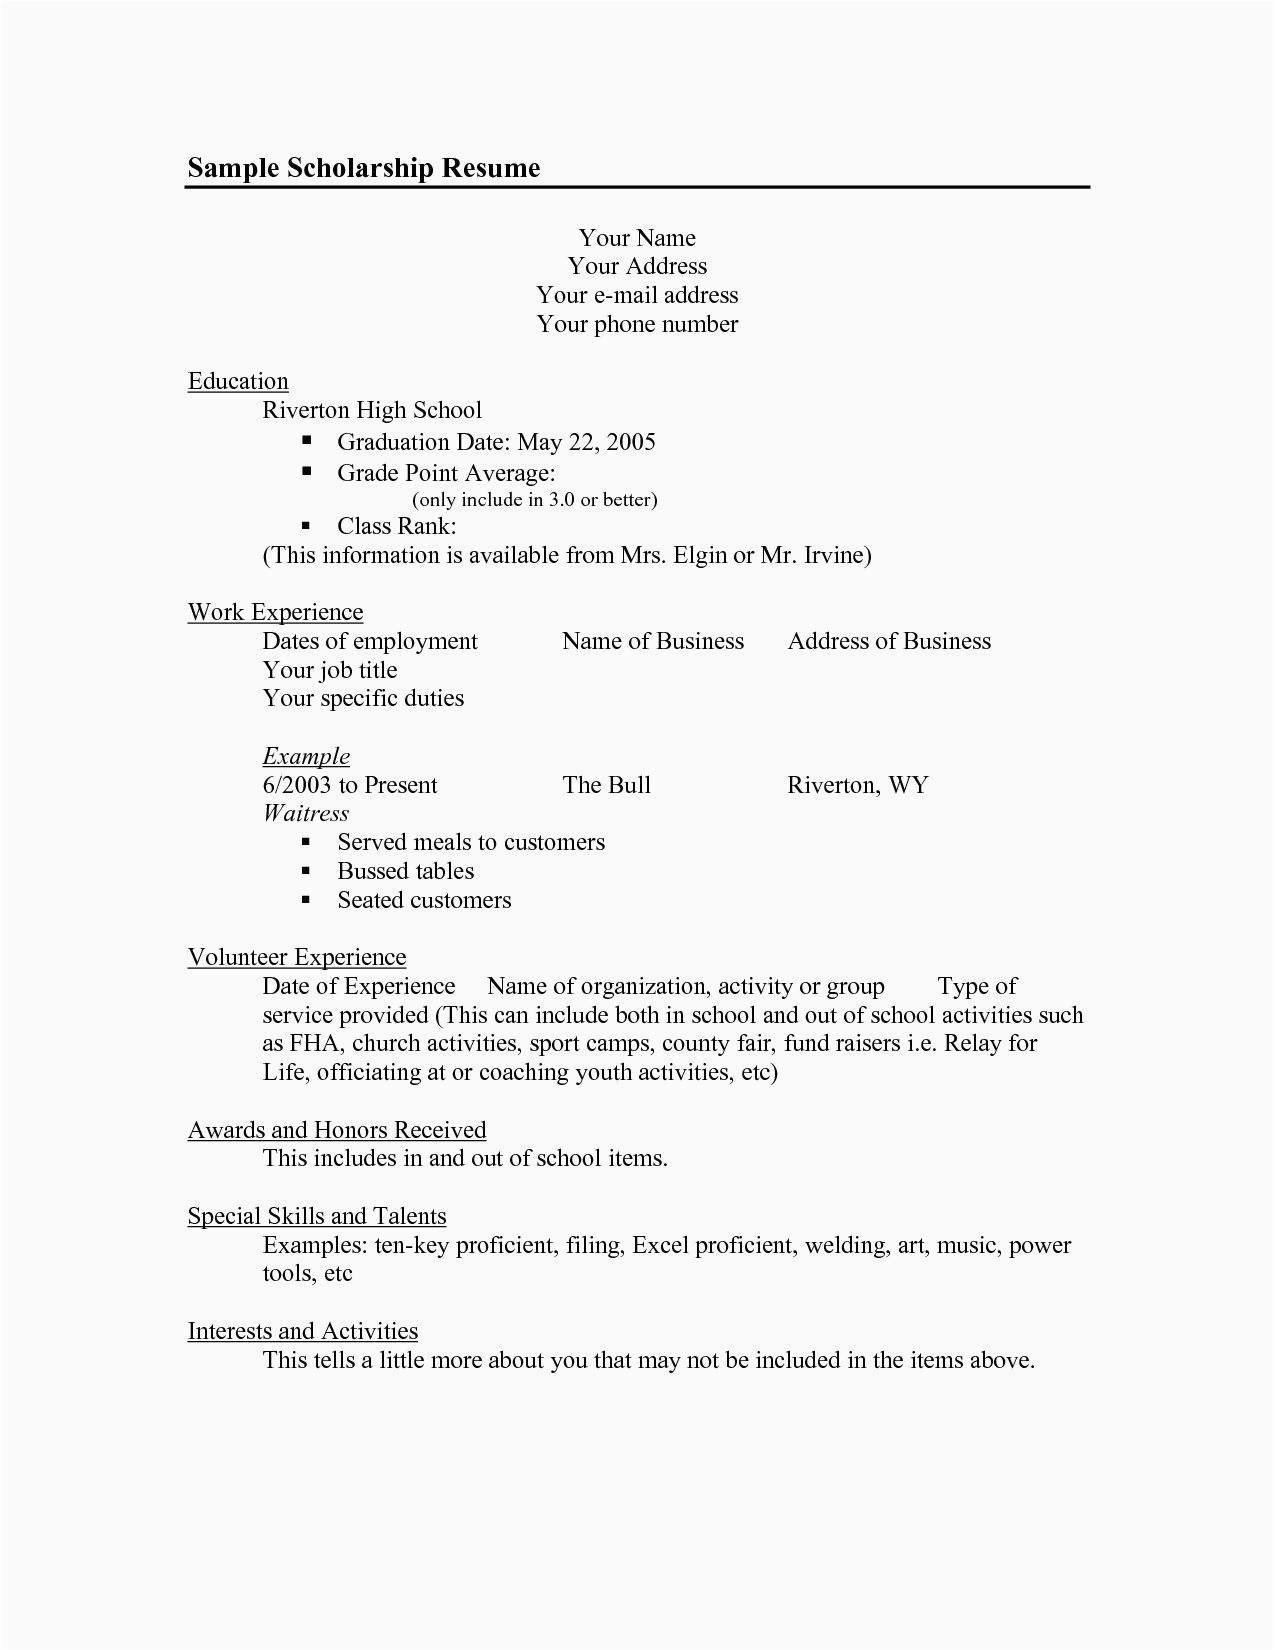 Sample College Graduate Spelling Proofreading Resume Skills Personal Statement Sample for Scholarship